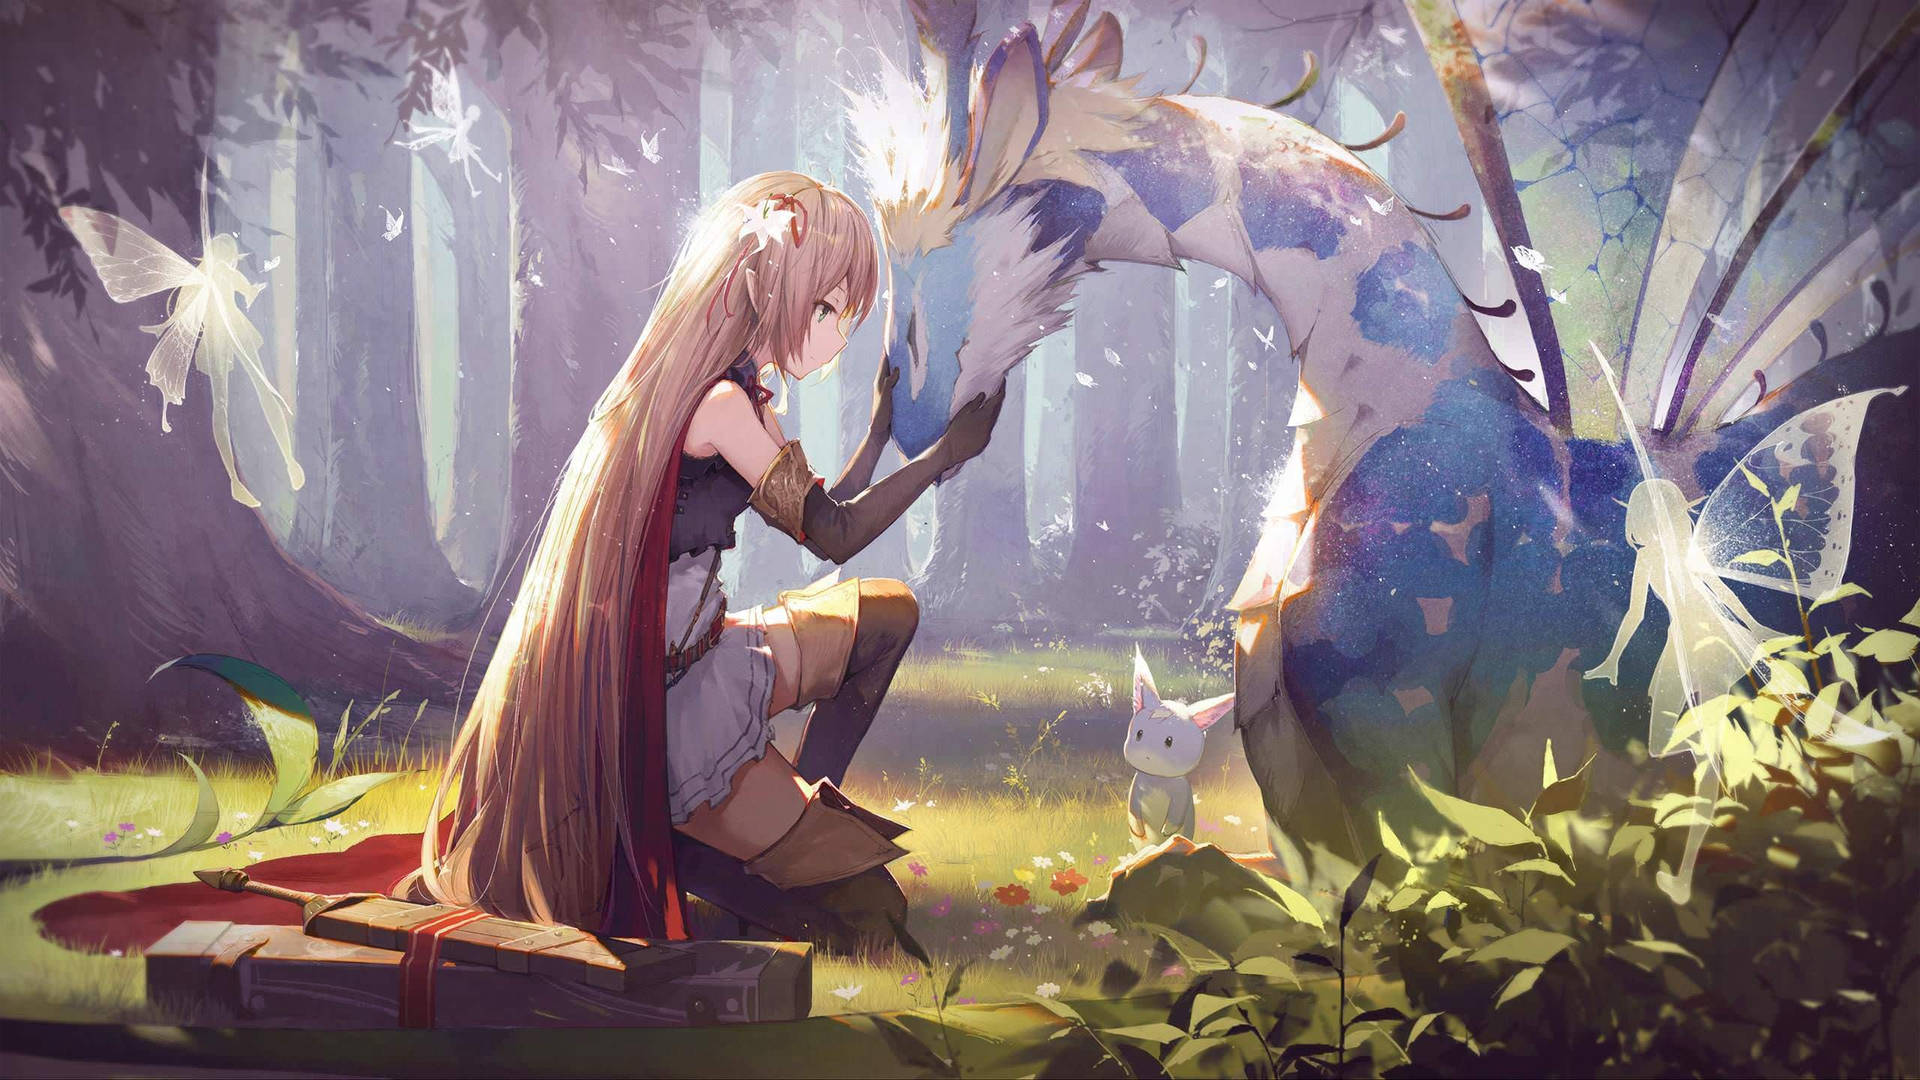 A Girl Is Sitting Next To A Dragon In The Forest